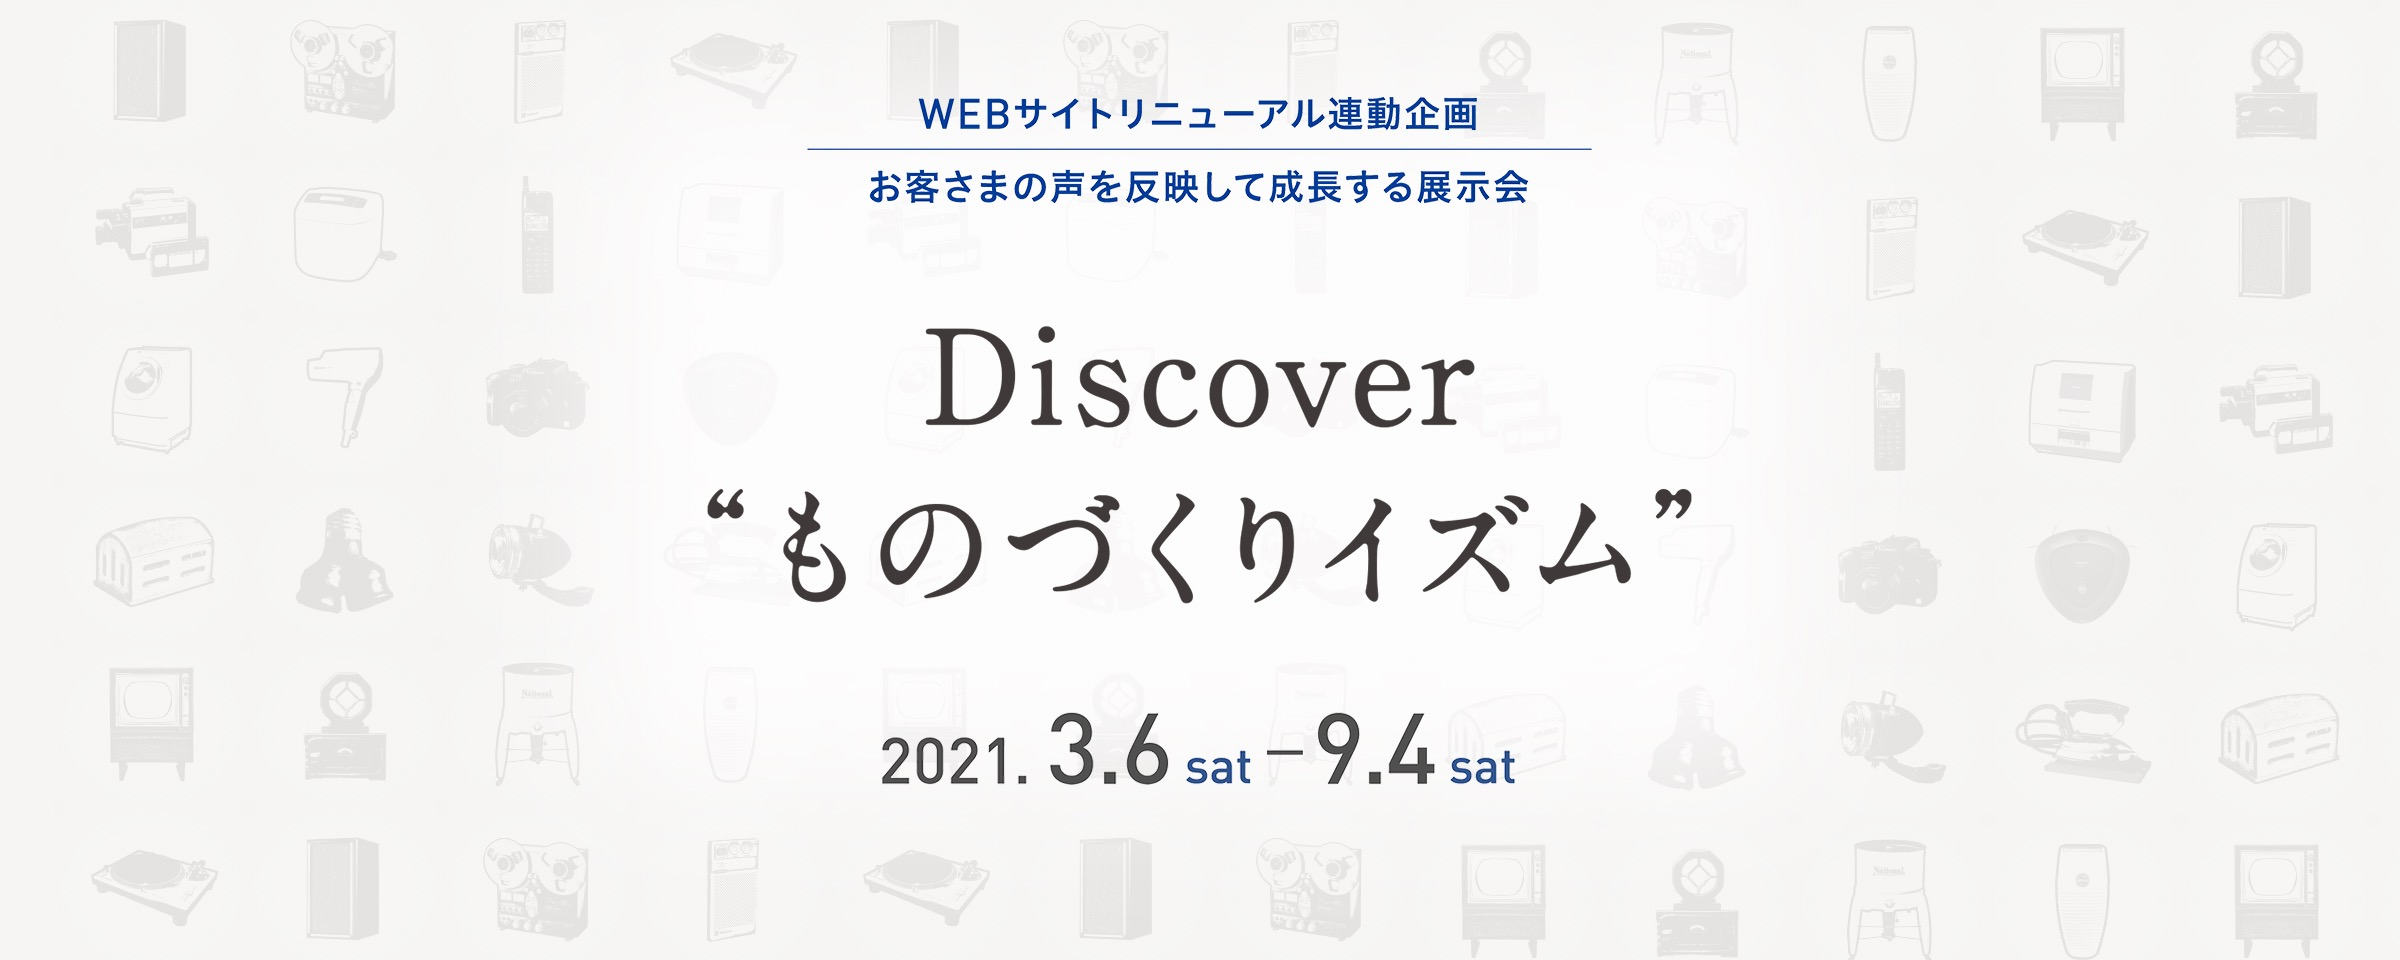 Discover “ものづくりイズム”